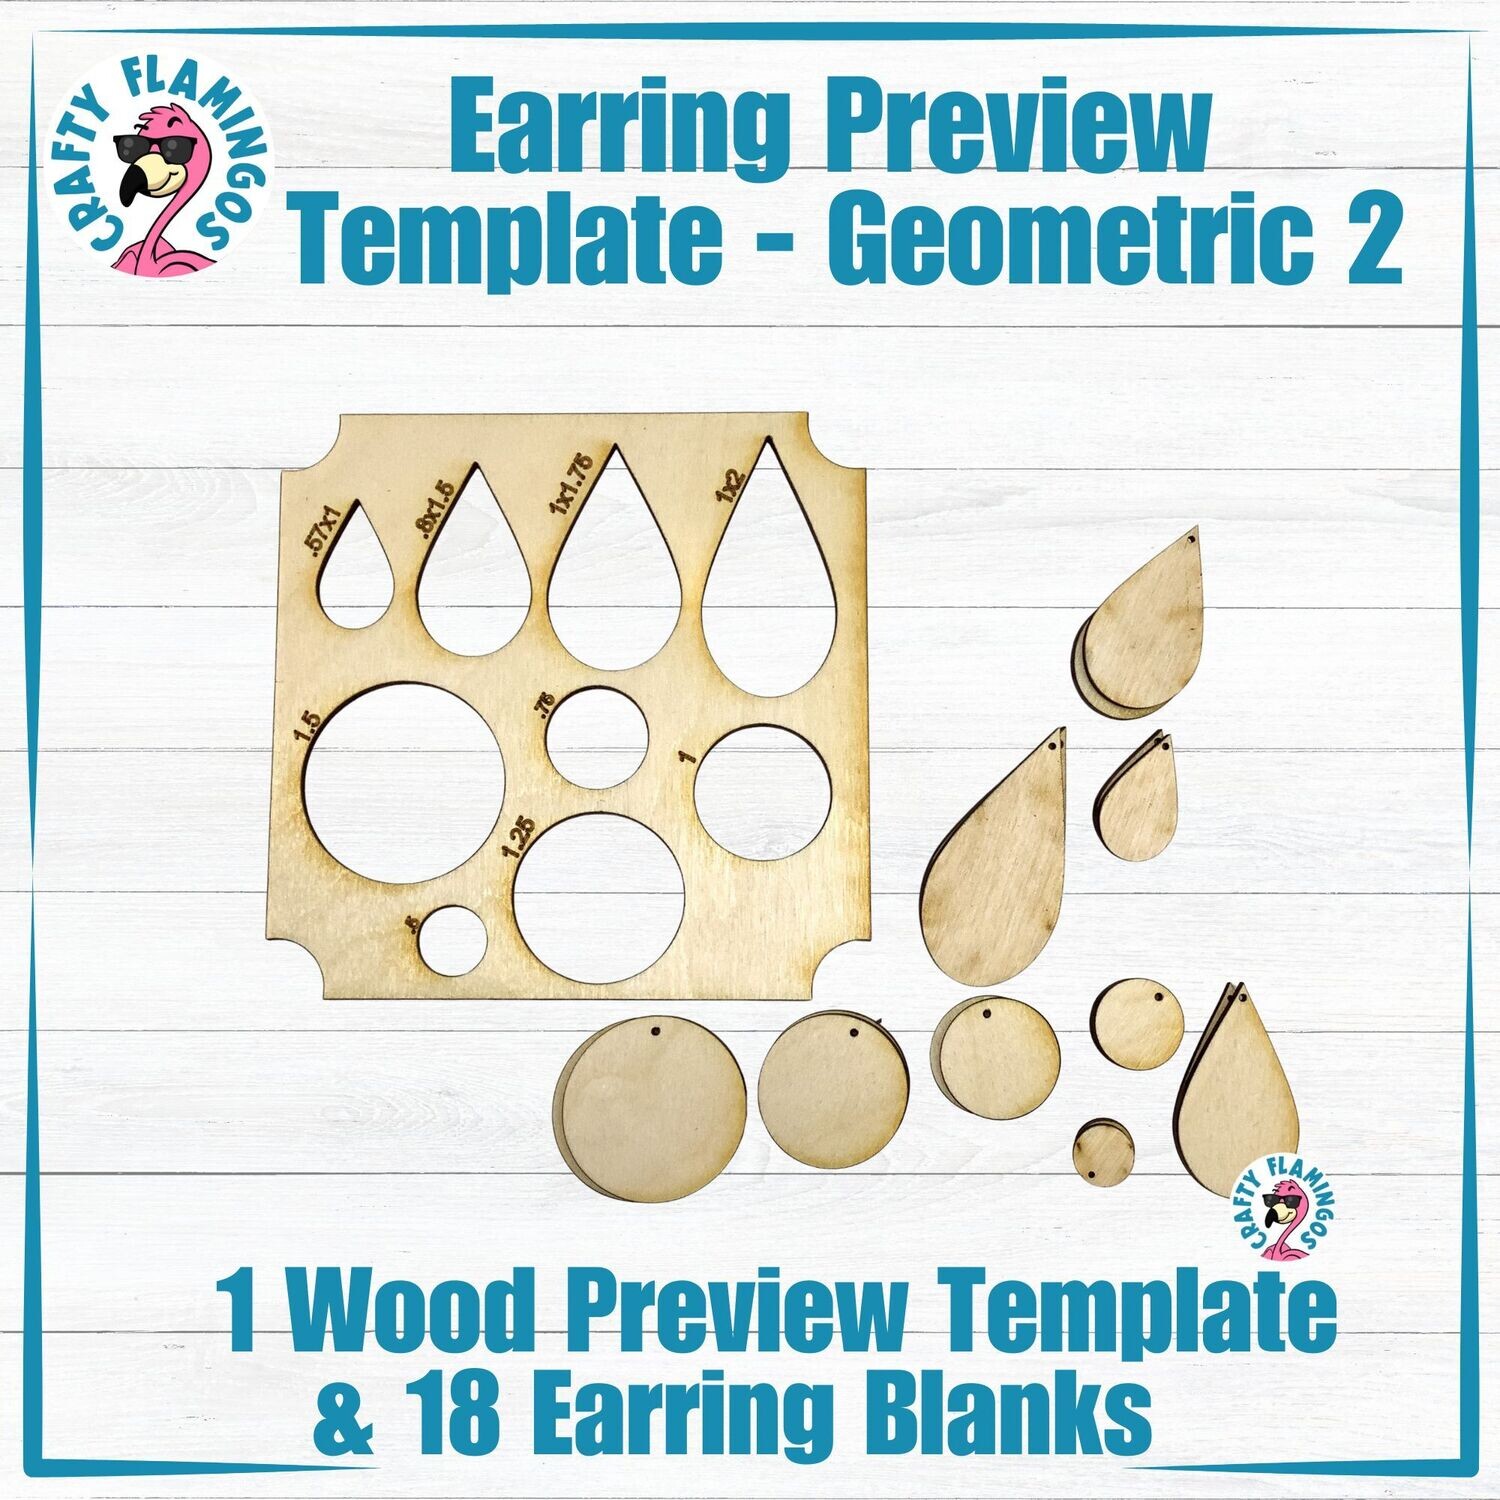 Earring Preview Template - Geometric 2 Circles and Teardrops with 18 Earring Blanks